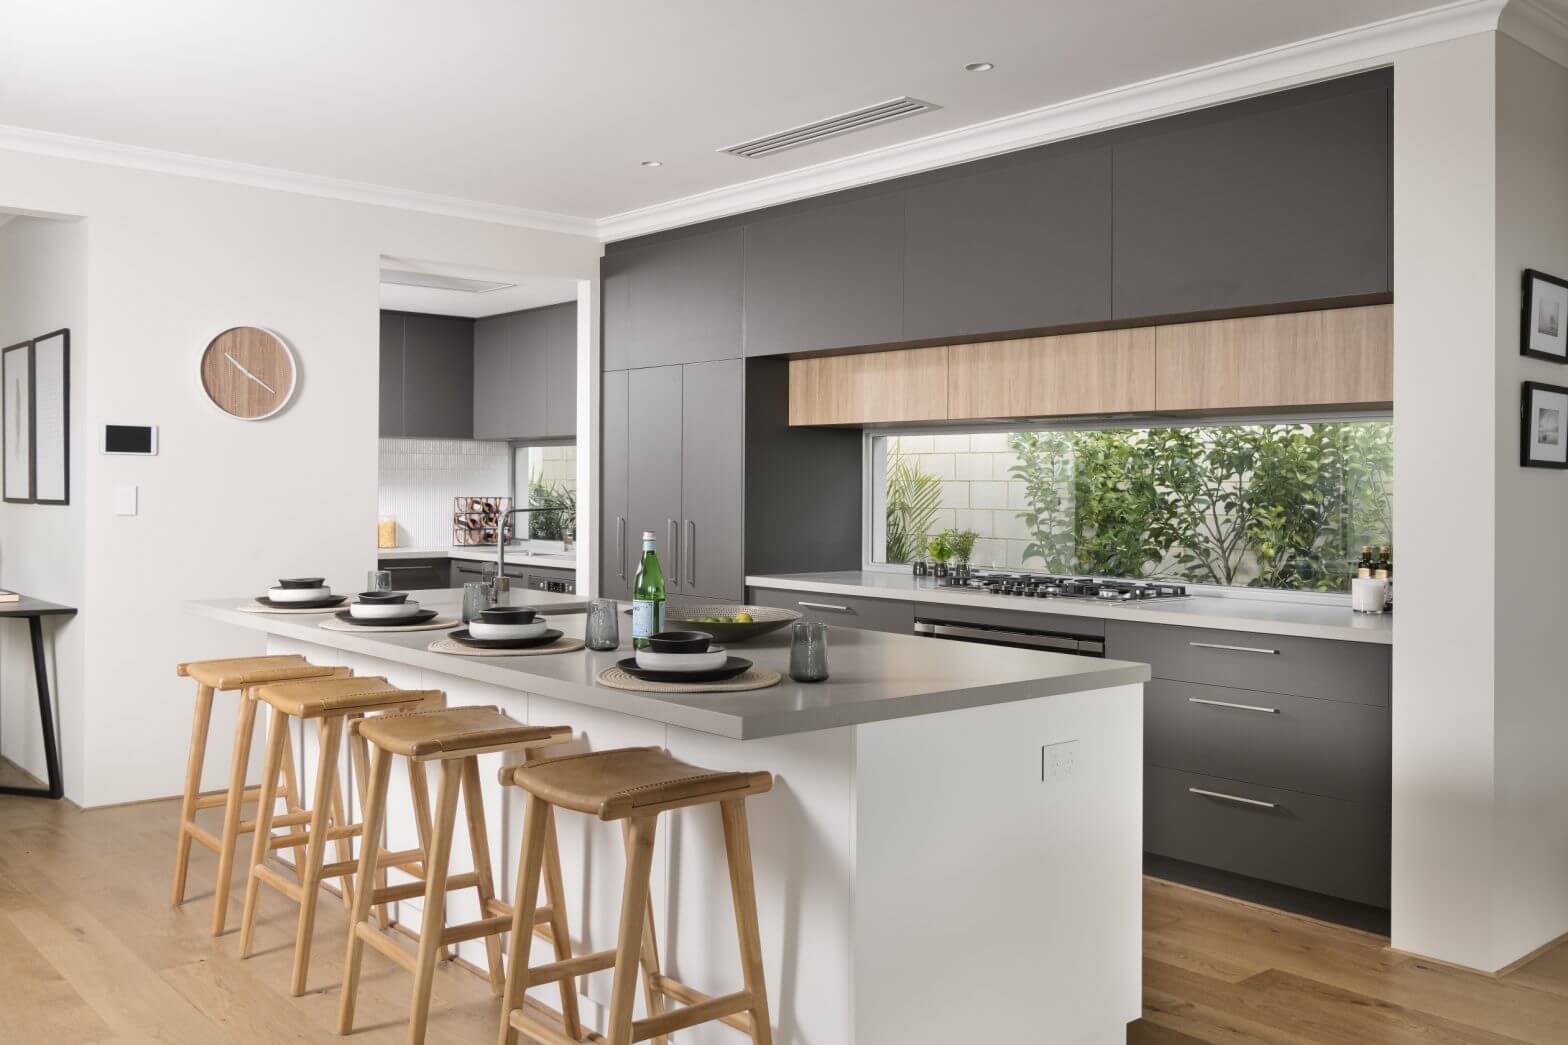 How to Choose the Right Kitchen Colour Scheme